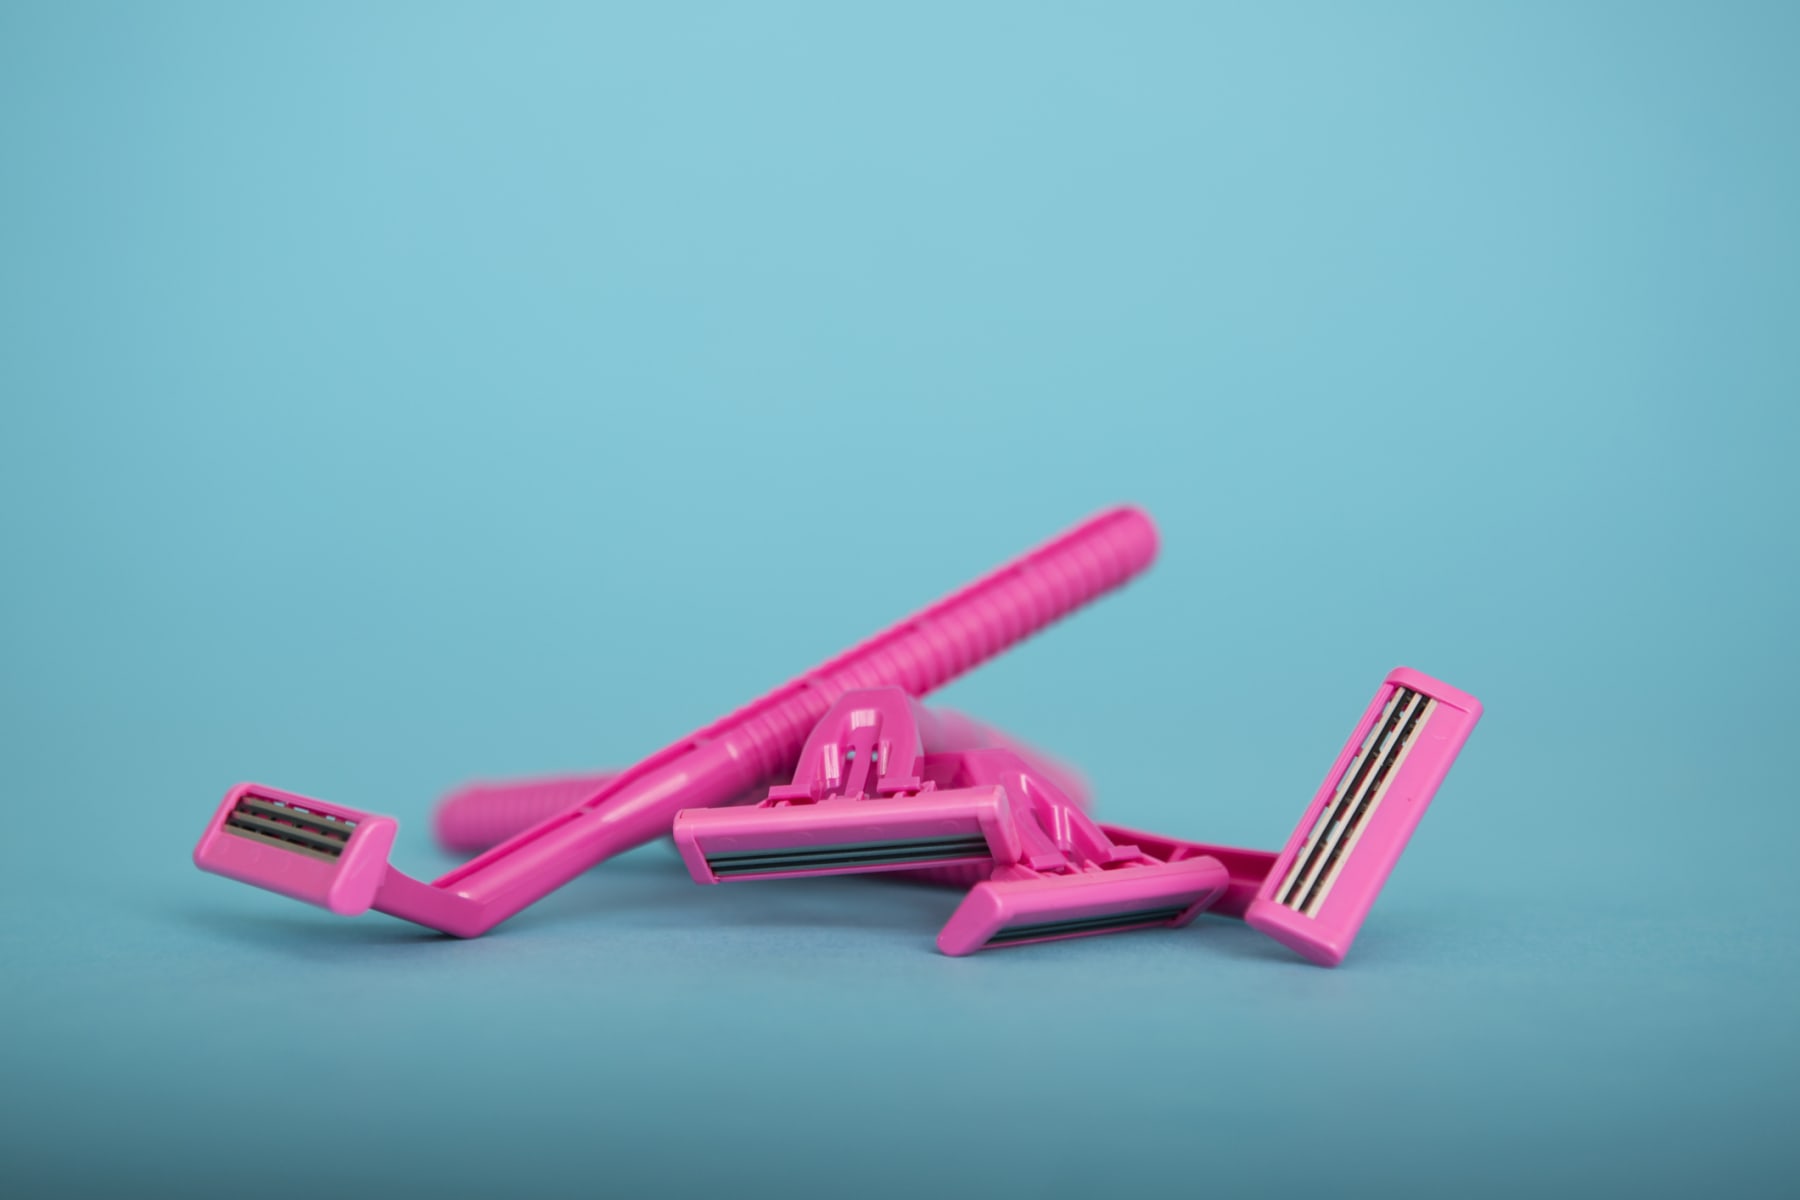 Generic pink razors shown in a pile.